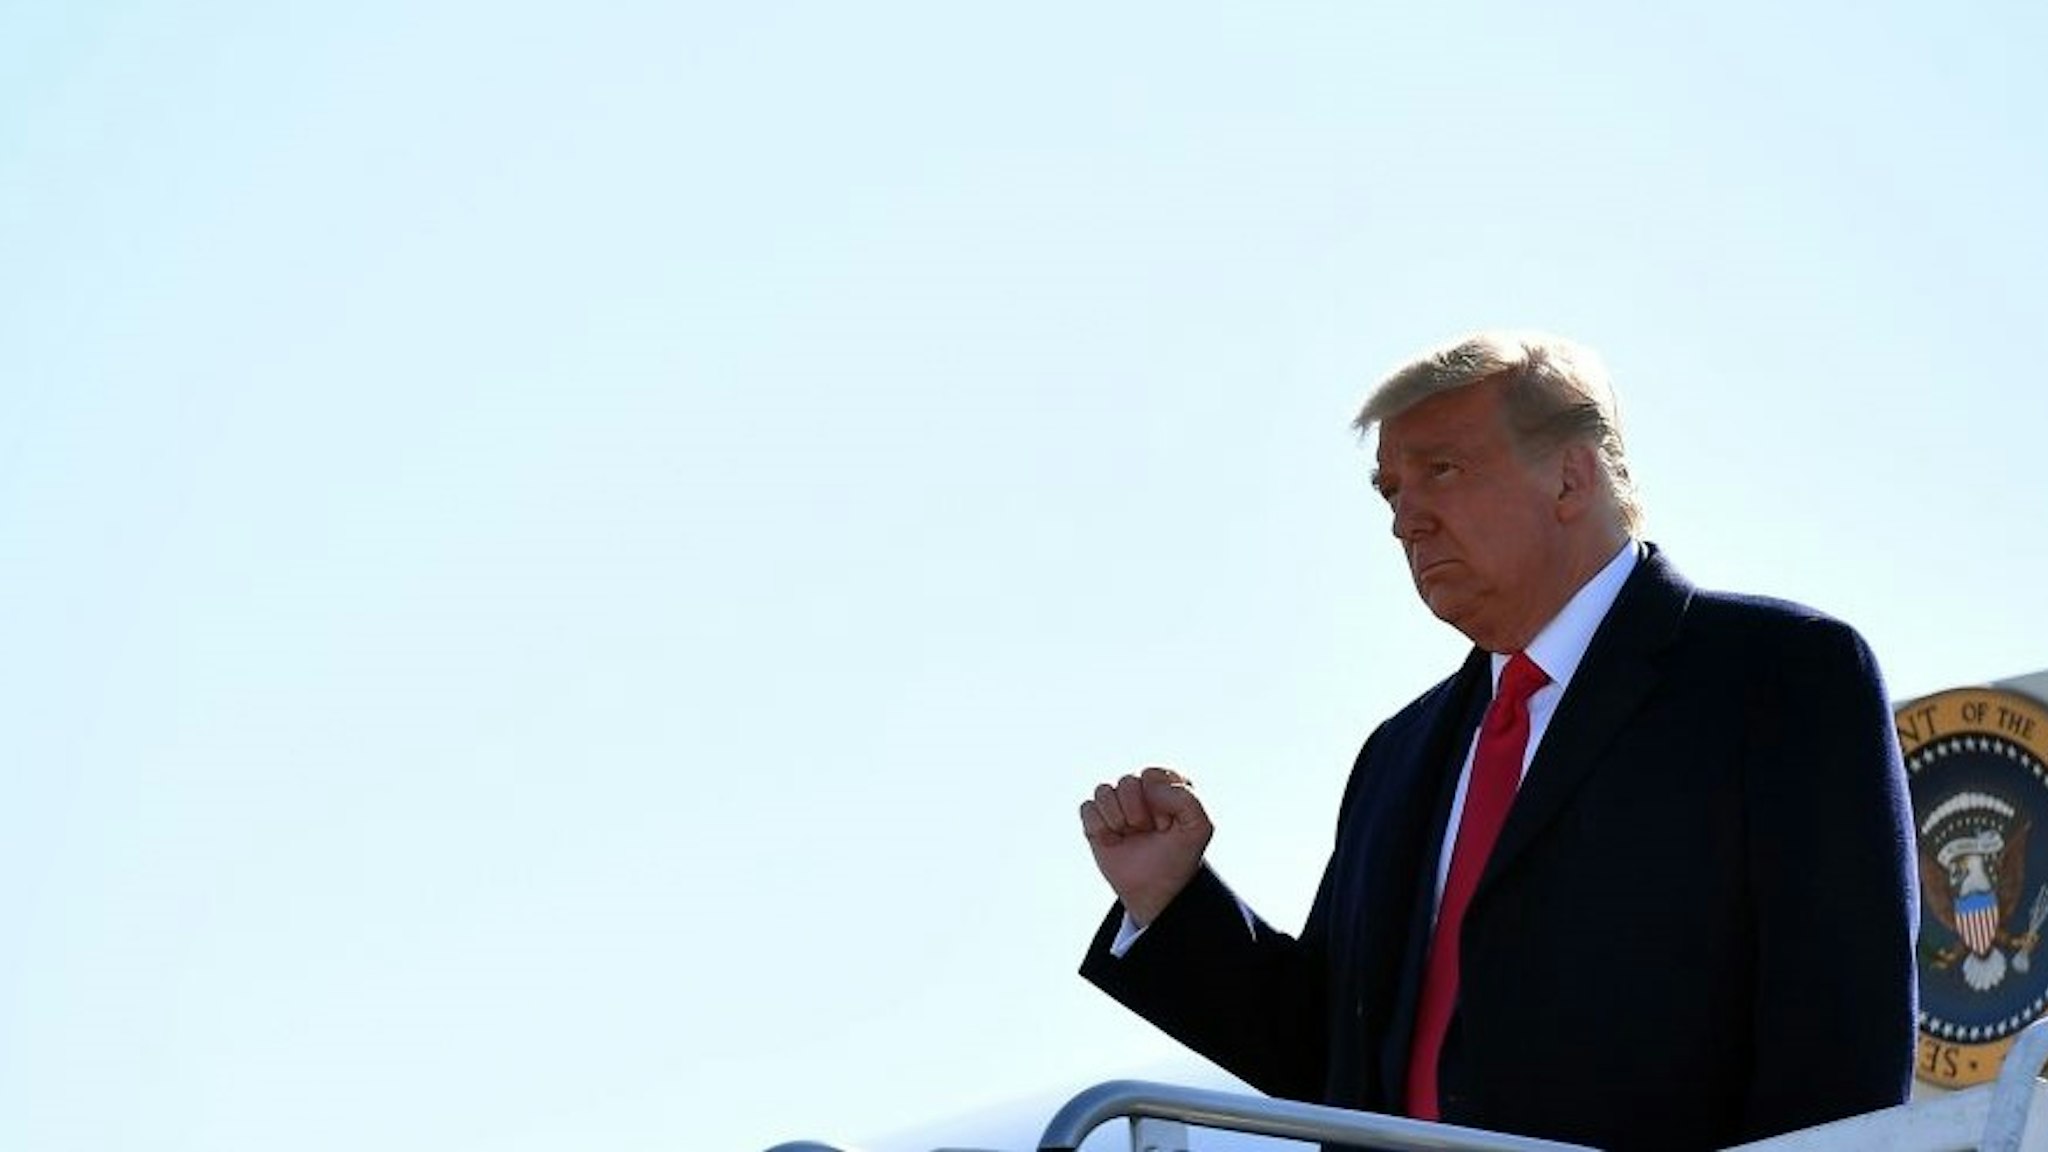 US President Donald Trump steps off Air Force One as he arrives at Trenton-Mercer Airport in Ewing Township, New Jersey, on October 31, 2020. - President Trump travels to Newtown, Pennsylvania, for a "Make America Great Again" rally. (Photo by MANDEL NGAN / AFP) (Photo by